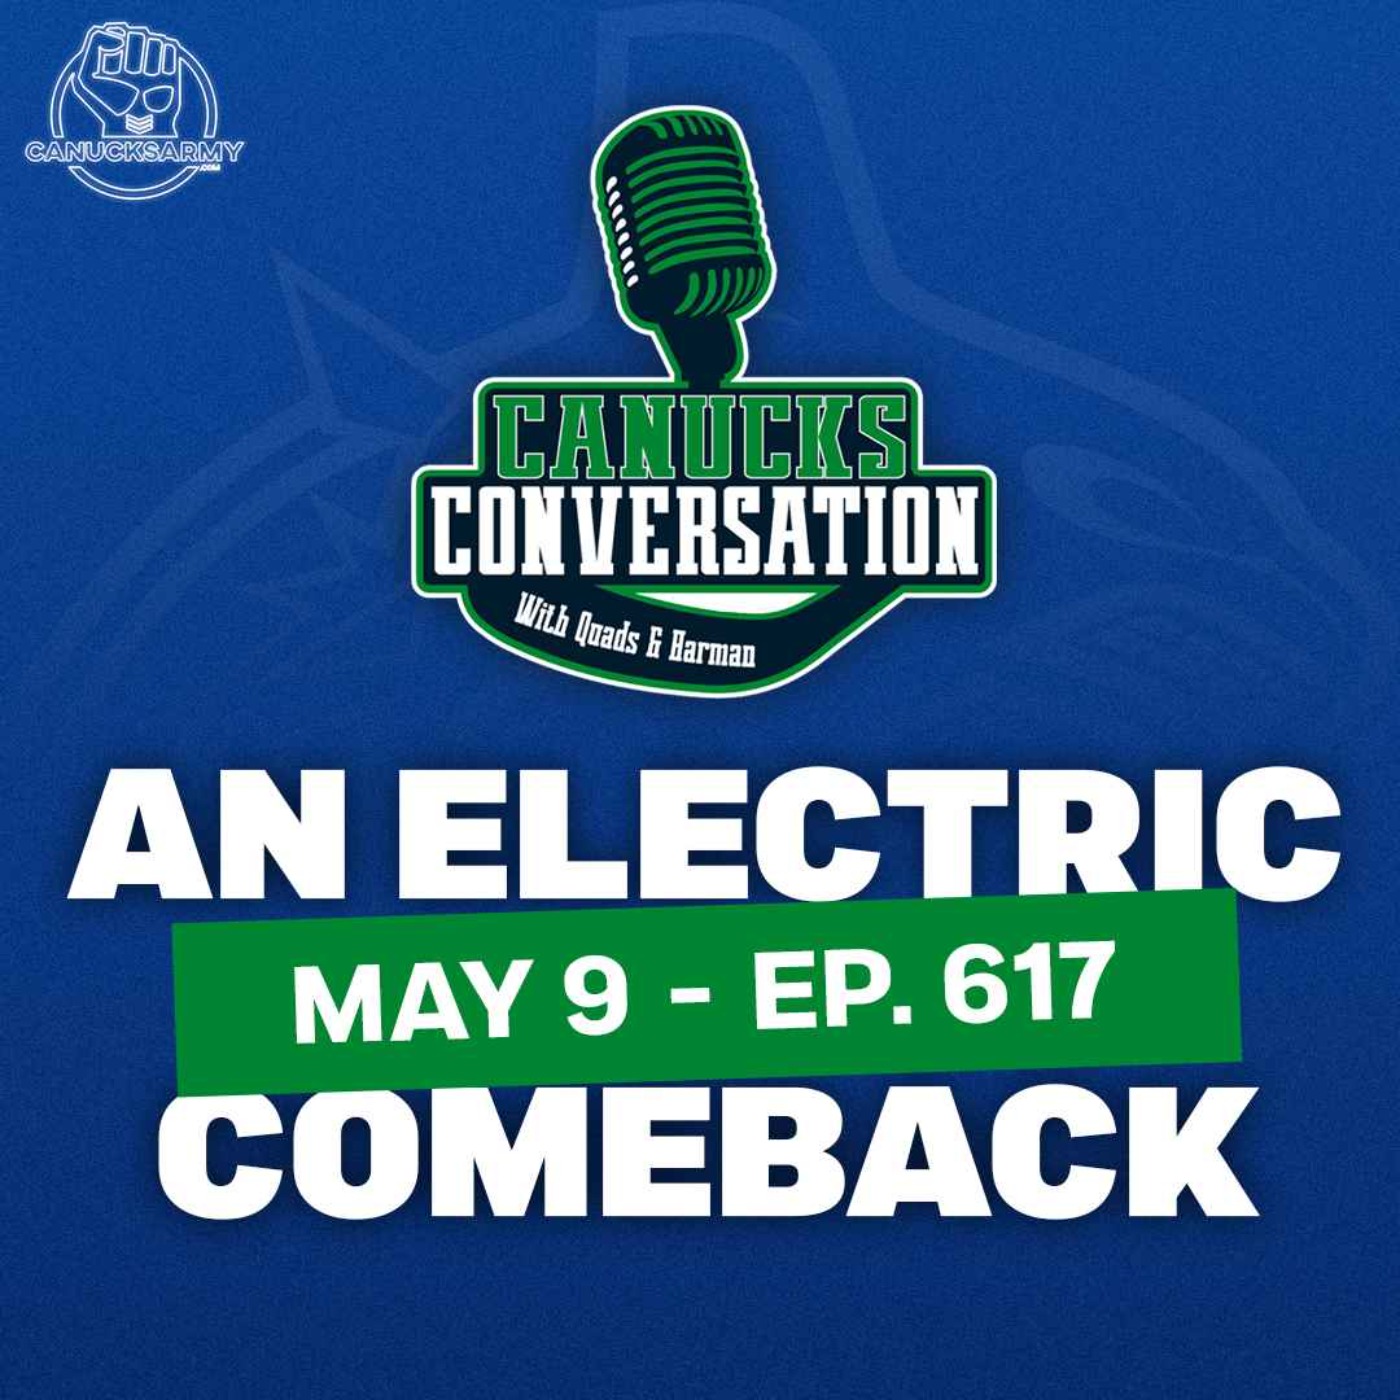 May 9: AN ELECTRIC GAME 1 COMEBACK ft. Frank Seravalli (Ep. 617)